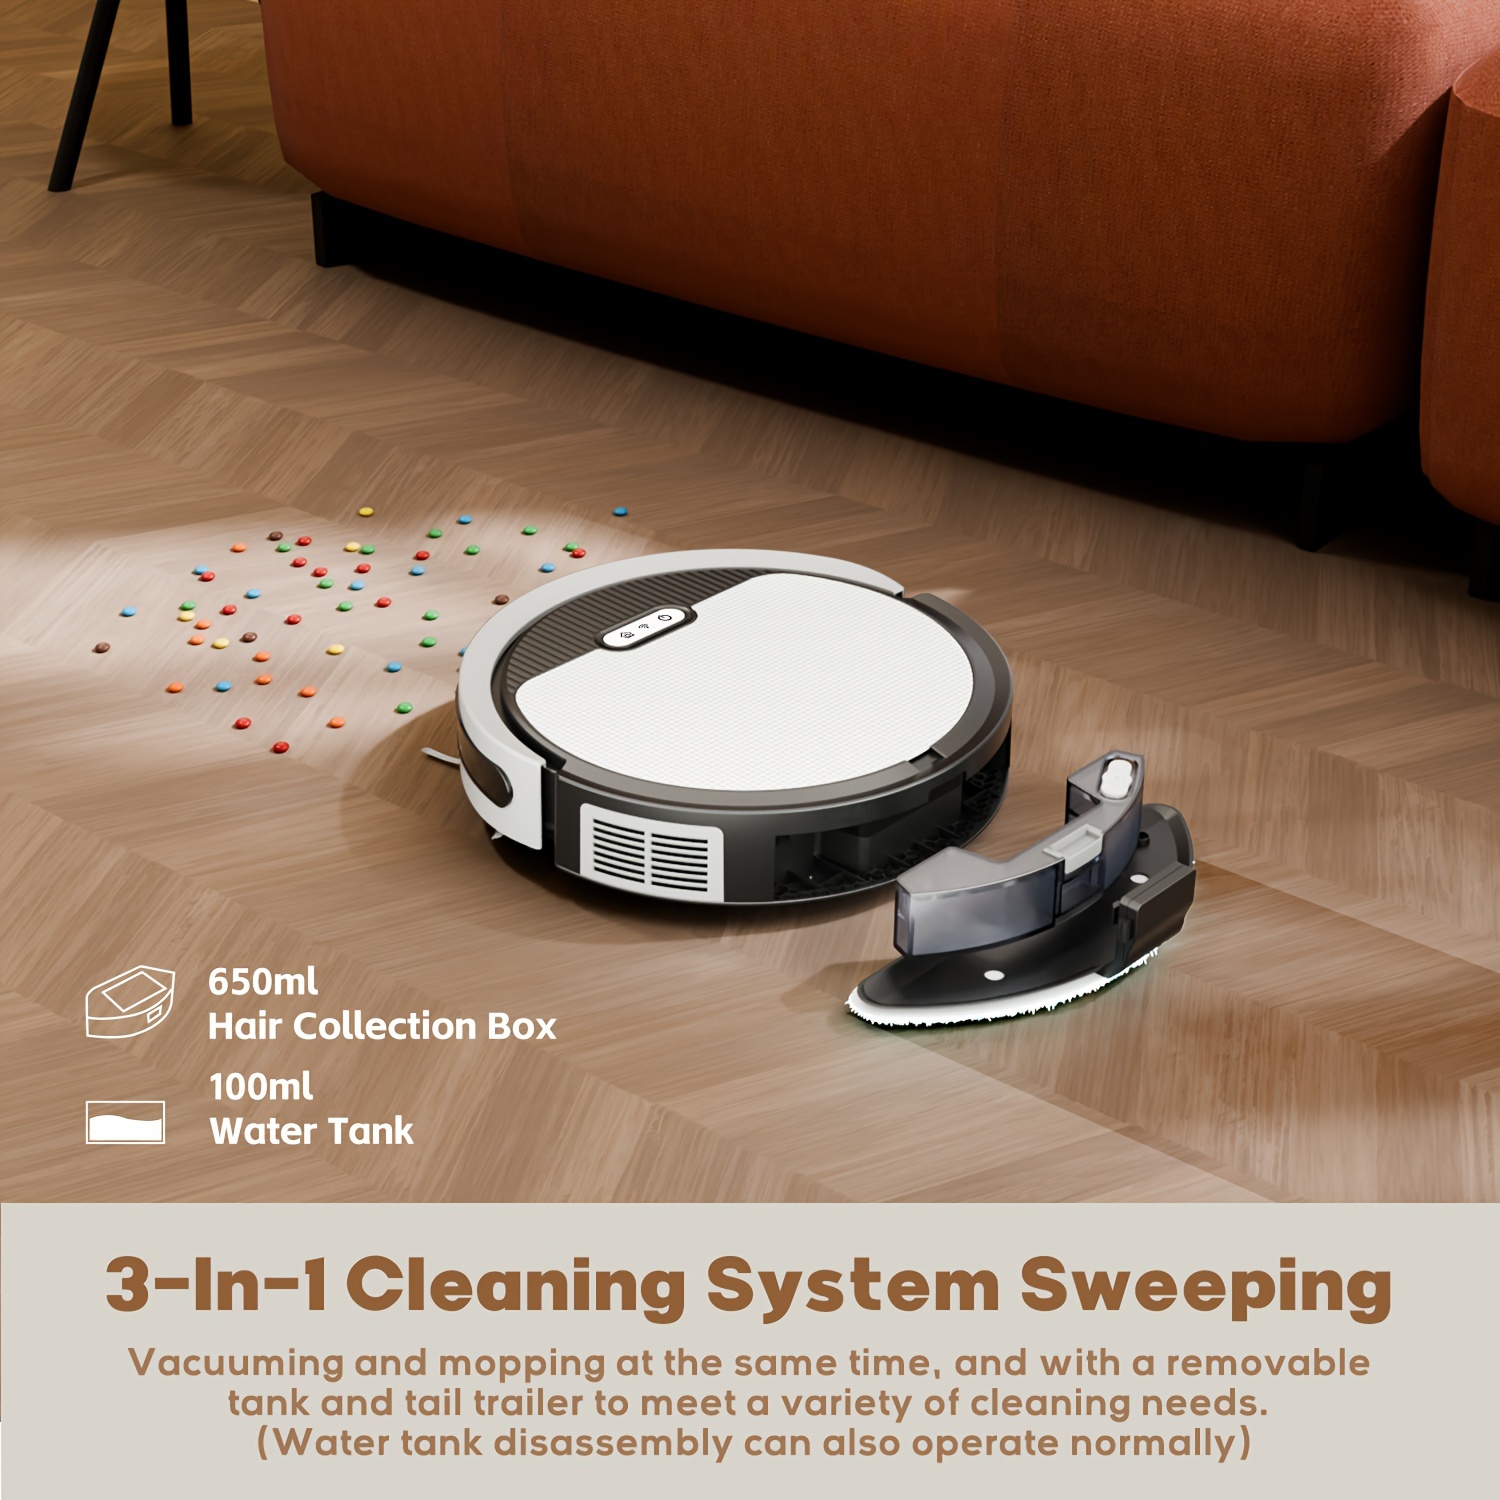 

Robot Vacuum And Mop Combo 2 In 1, 4000pa Strong Suction, Robotic Vacuum Cleaner, 120 Mins Max, App/remote/voice Contro, Self-charging, Good For Carpet, Hard Floor, White Black